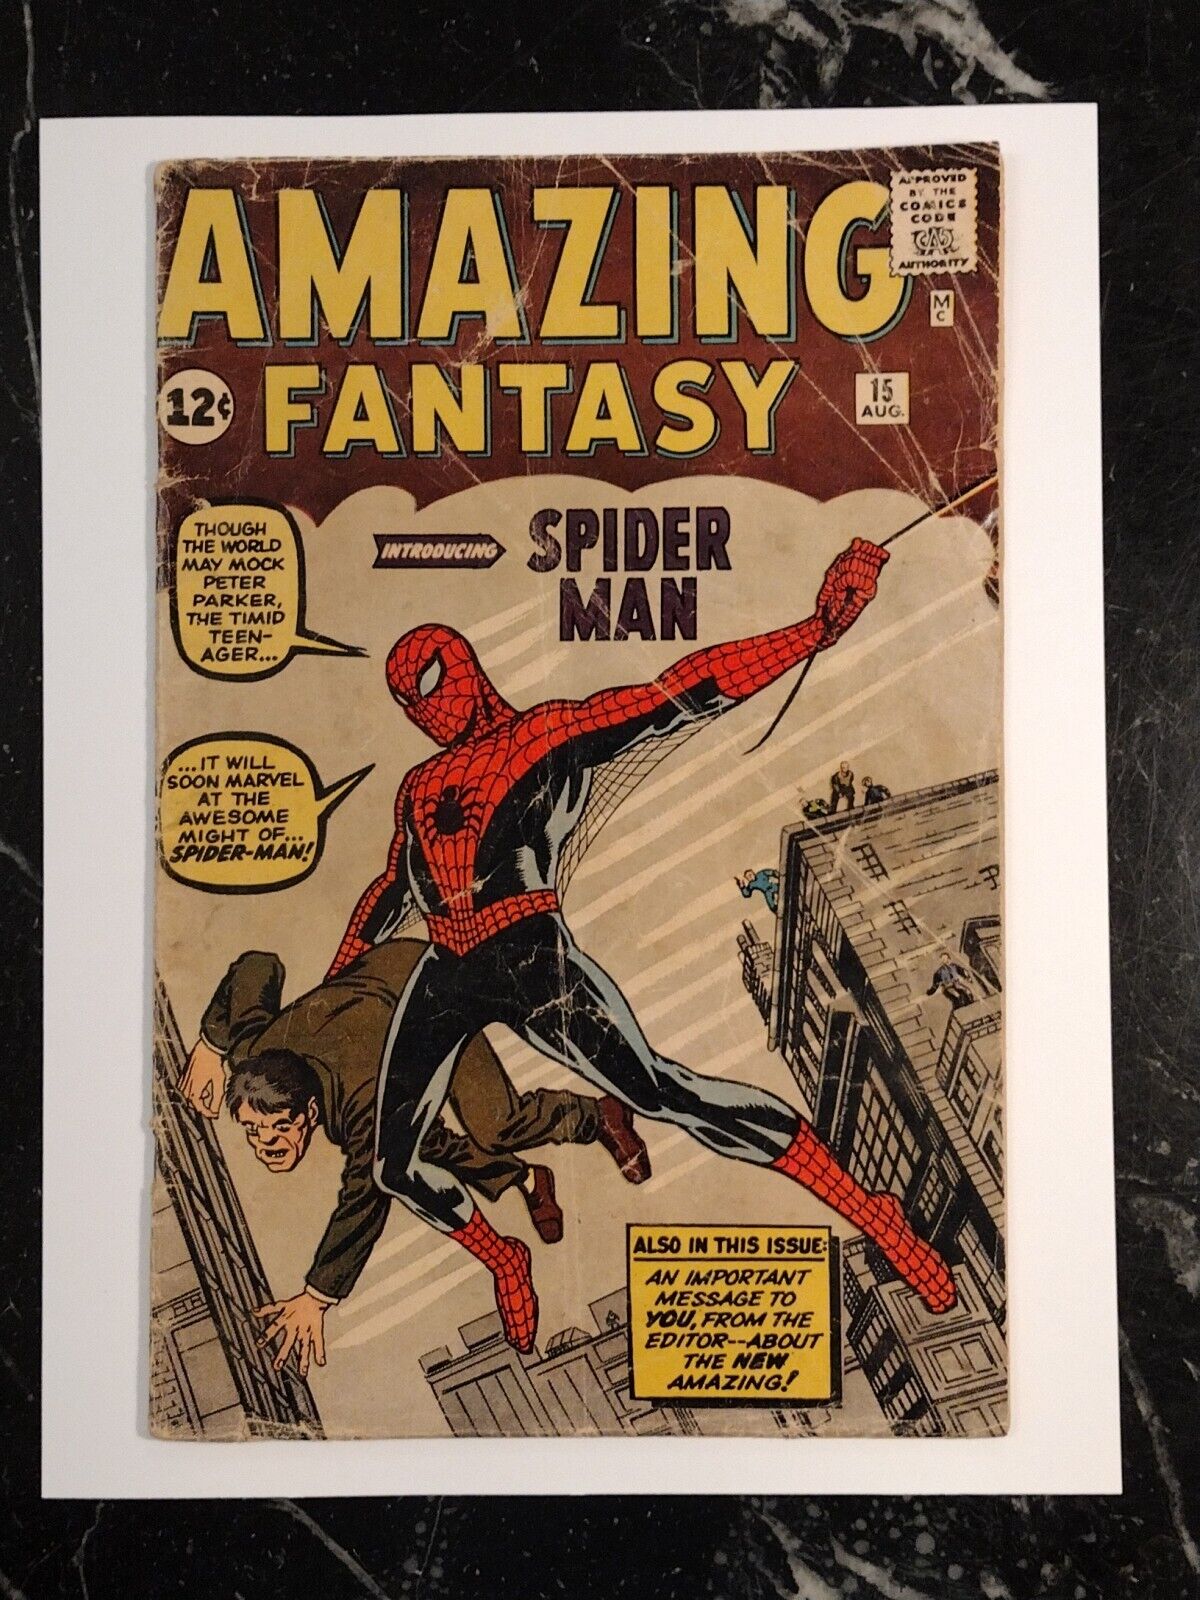 LOSING MY HOUSE - MUST SELL   Amazing Fantasy #15  VG-FINE 5.0  HOLY GRAIL 1962